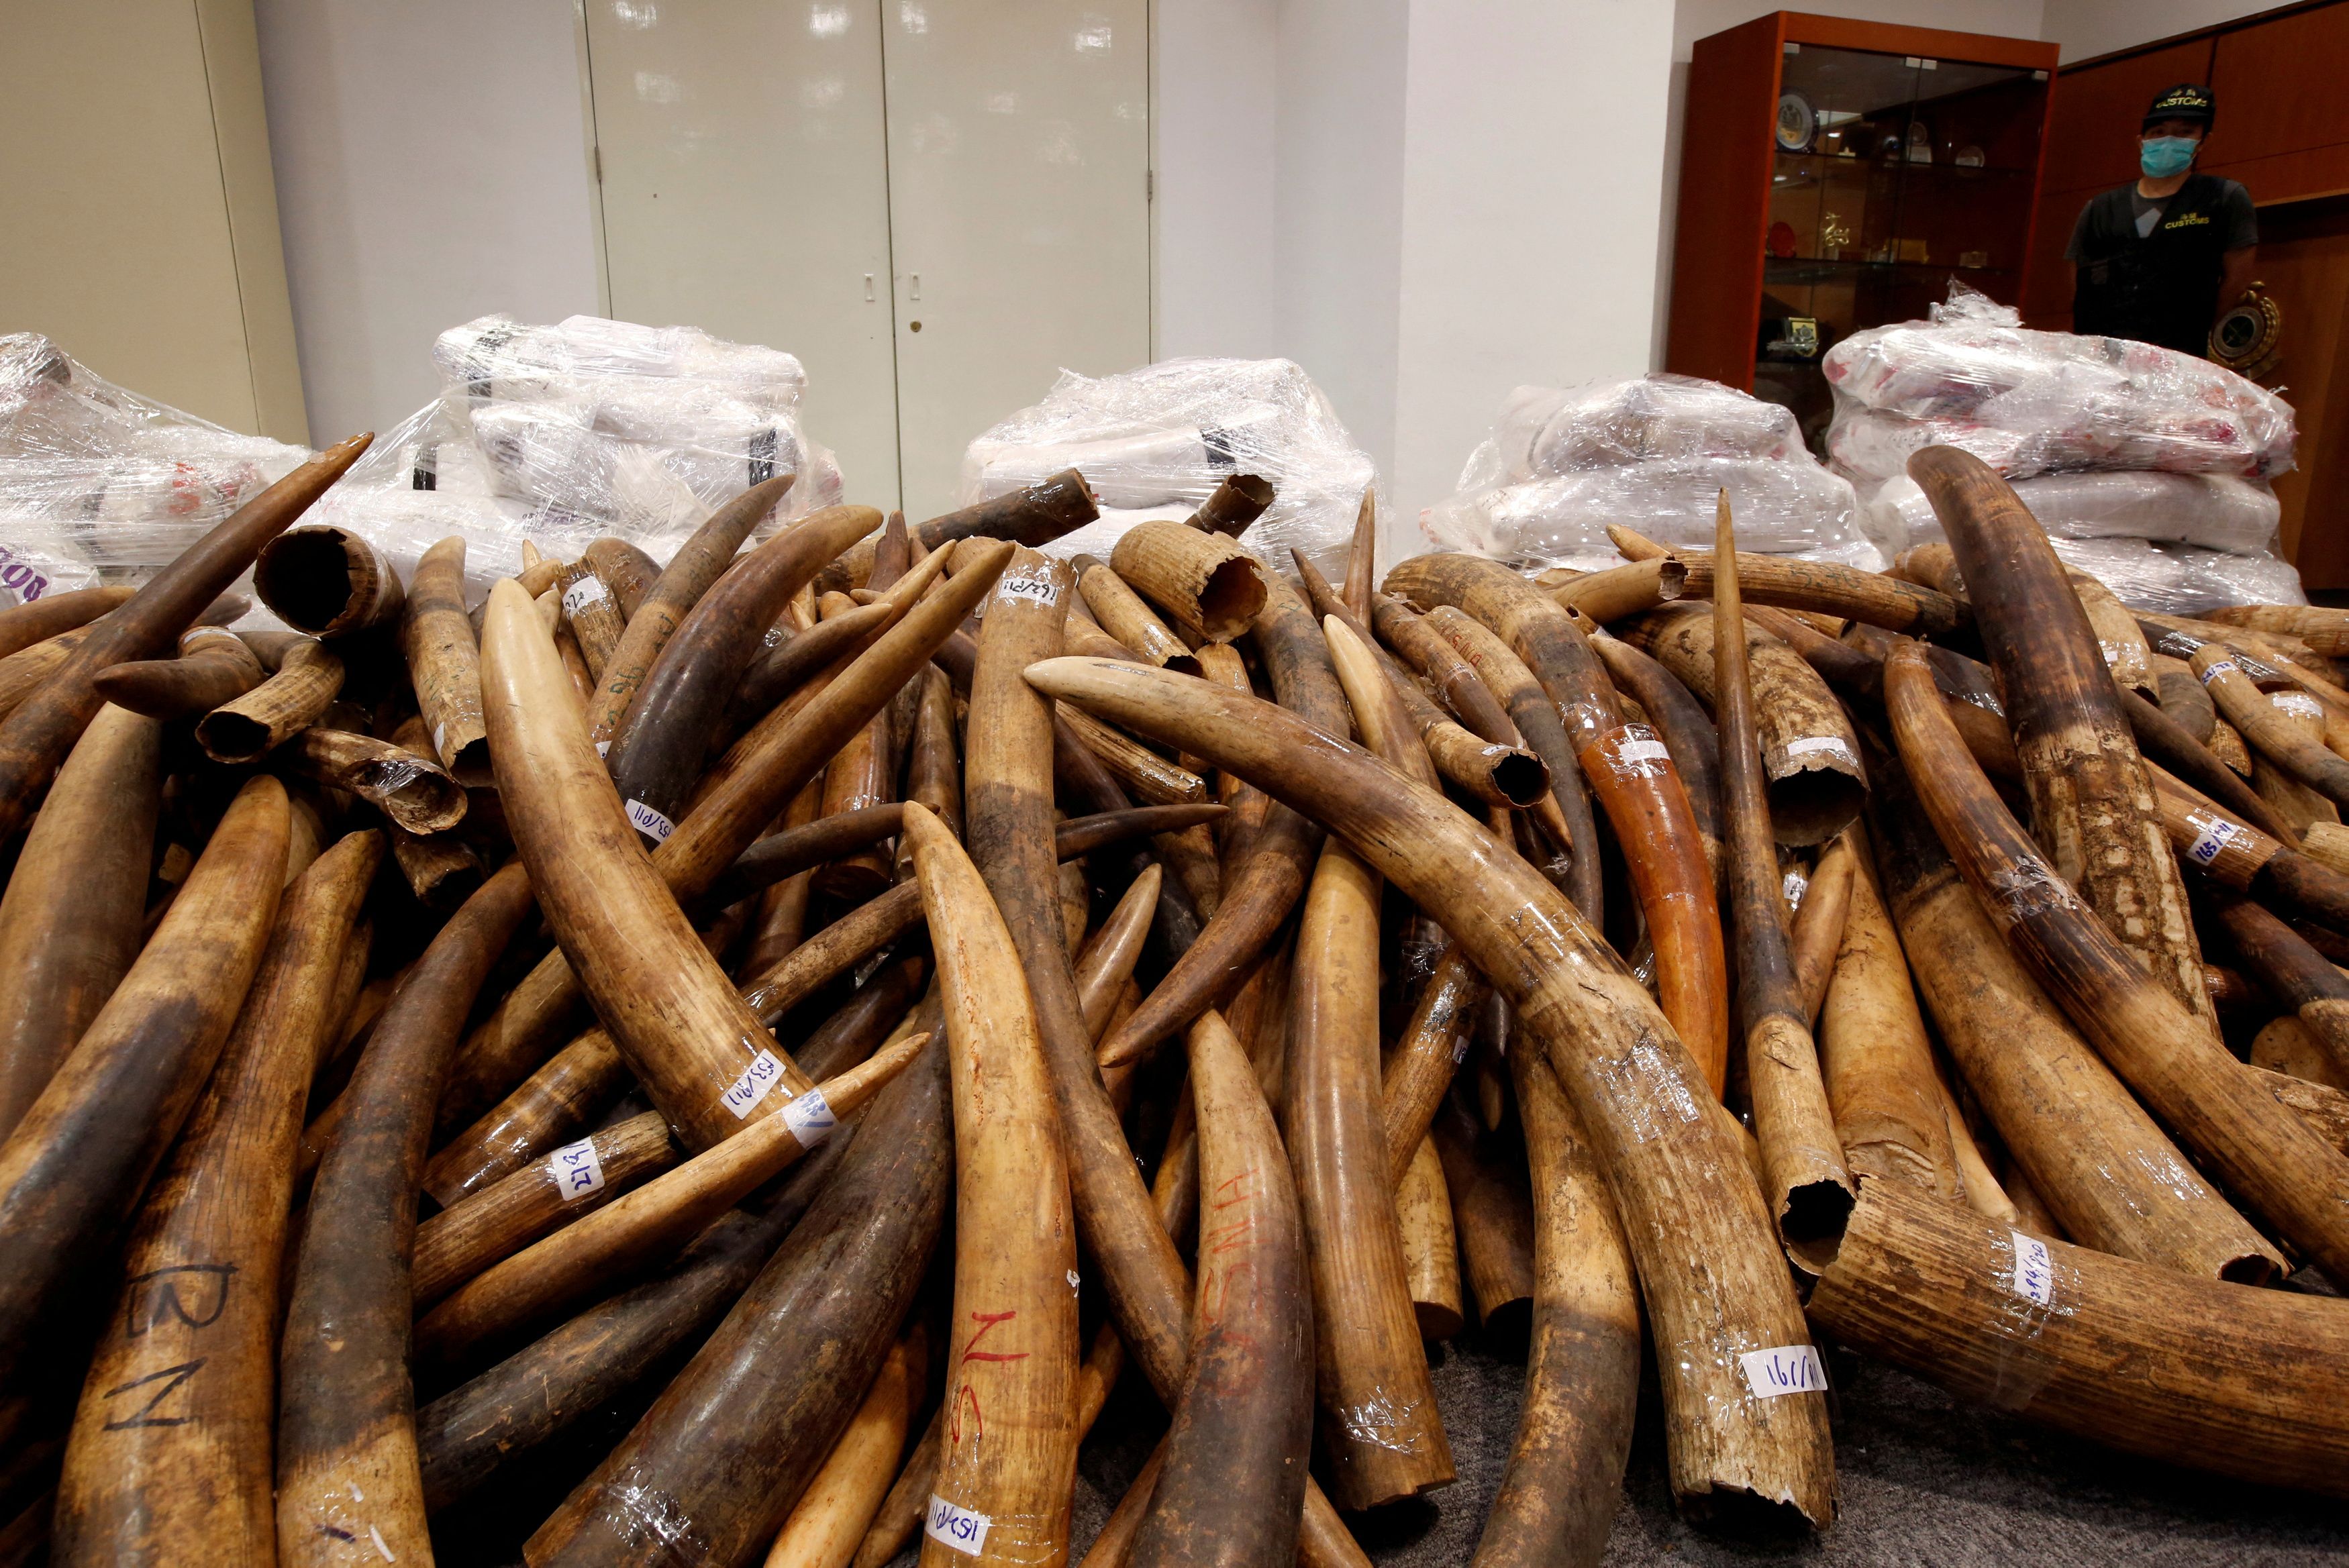 Ivory tusks seized by Hong Kong Customs are displayed at a news conference in Hong Kong